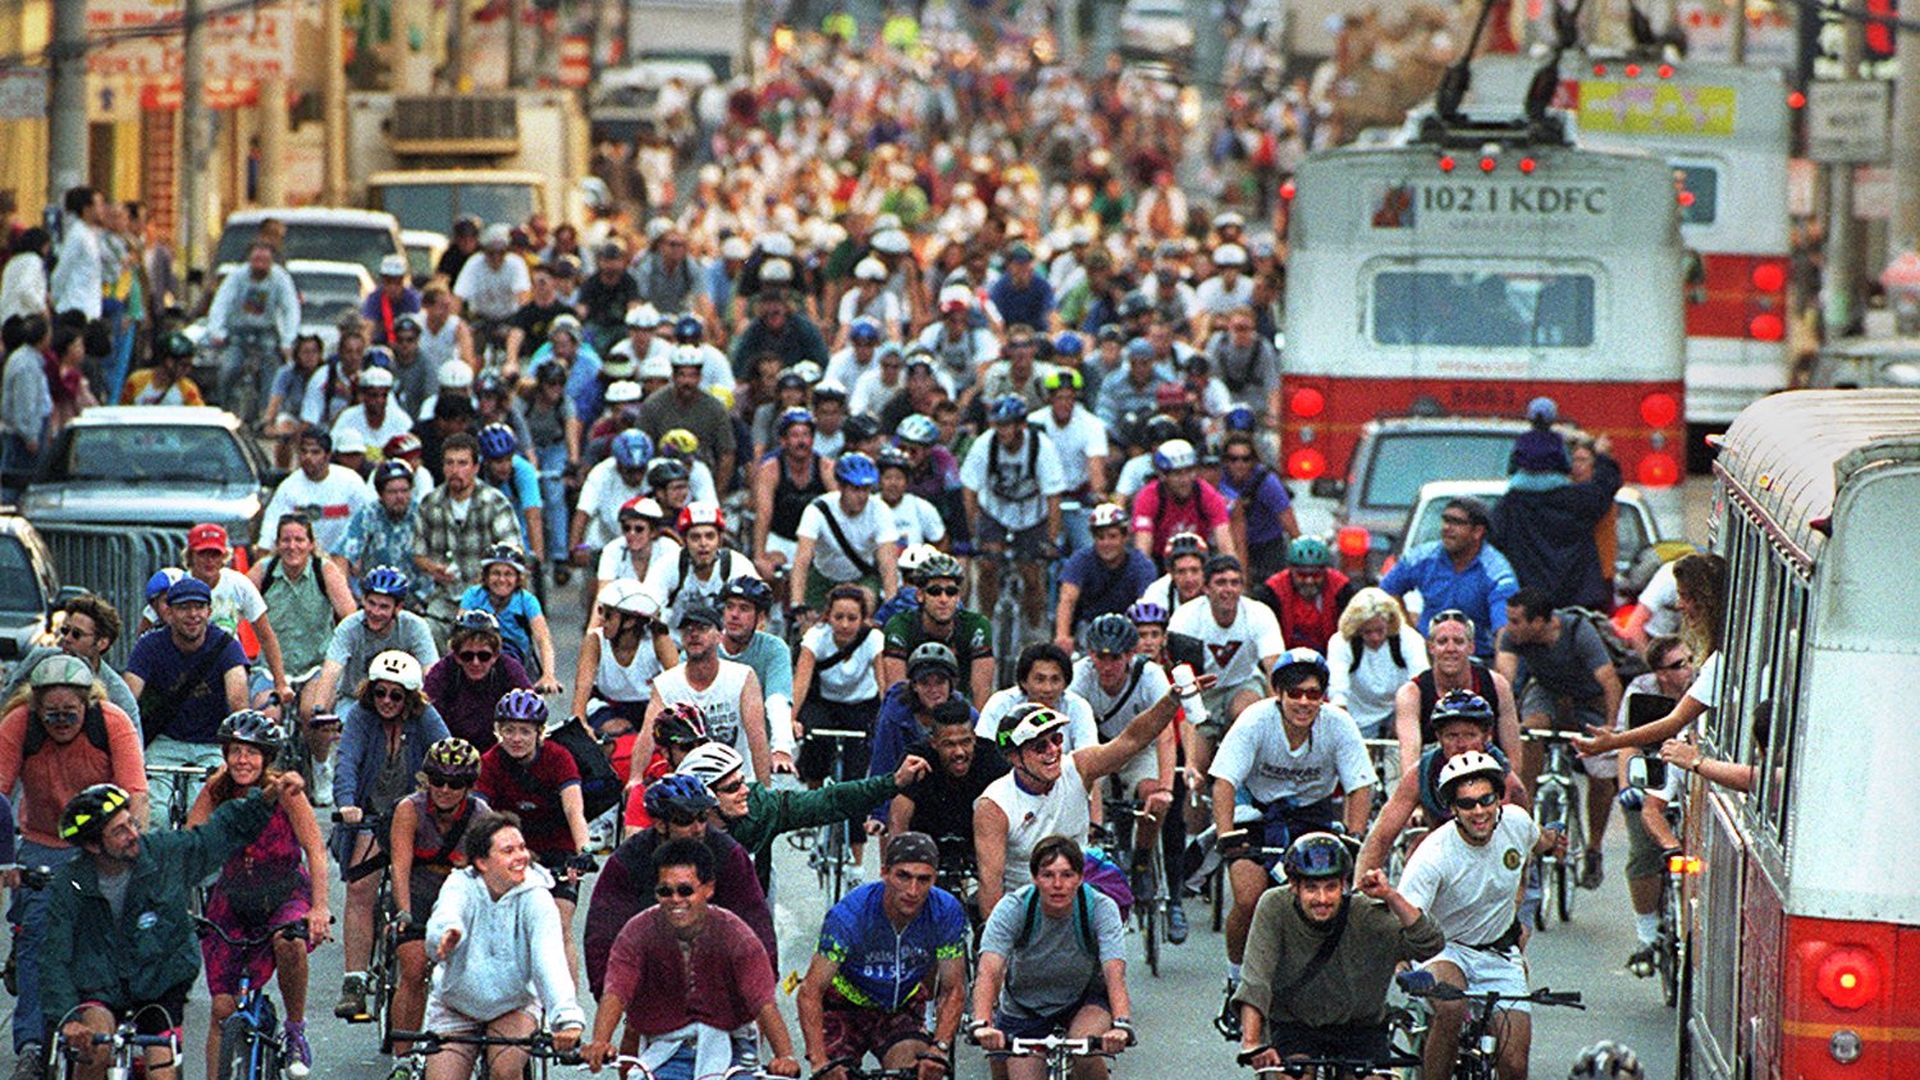 Crowd of bicyclers riding against traffic.